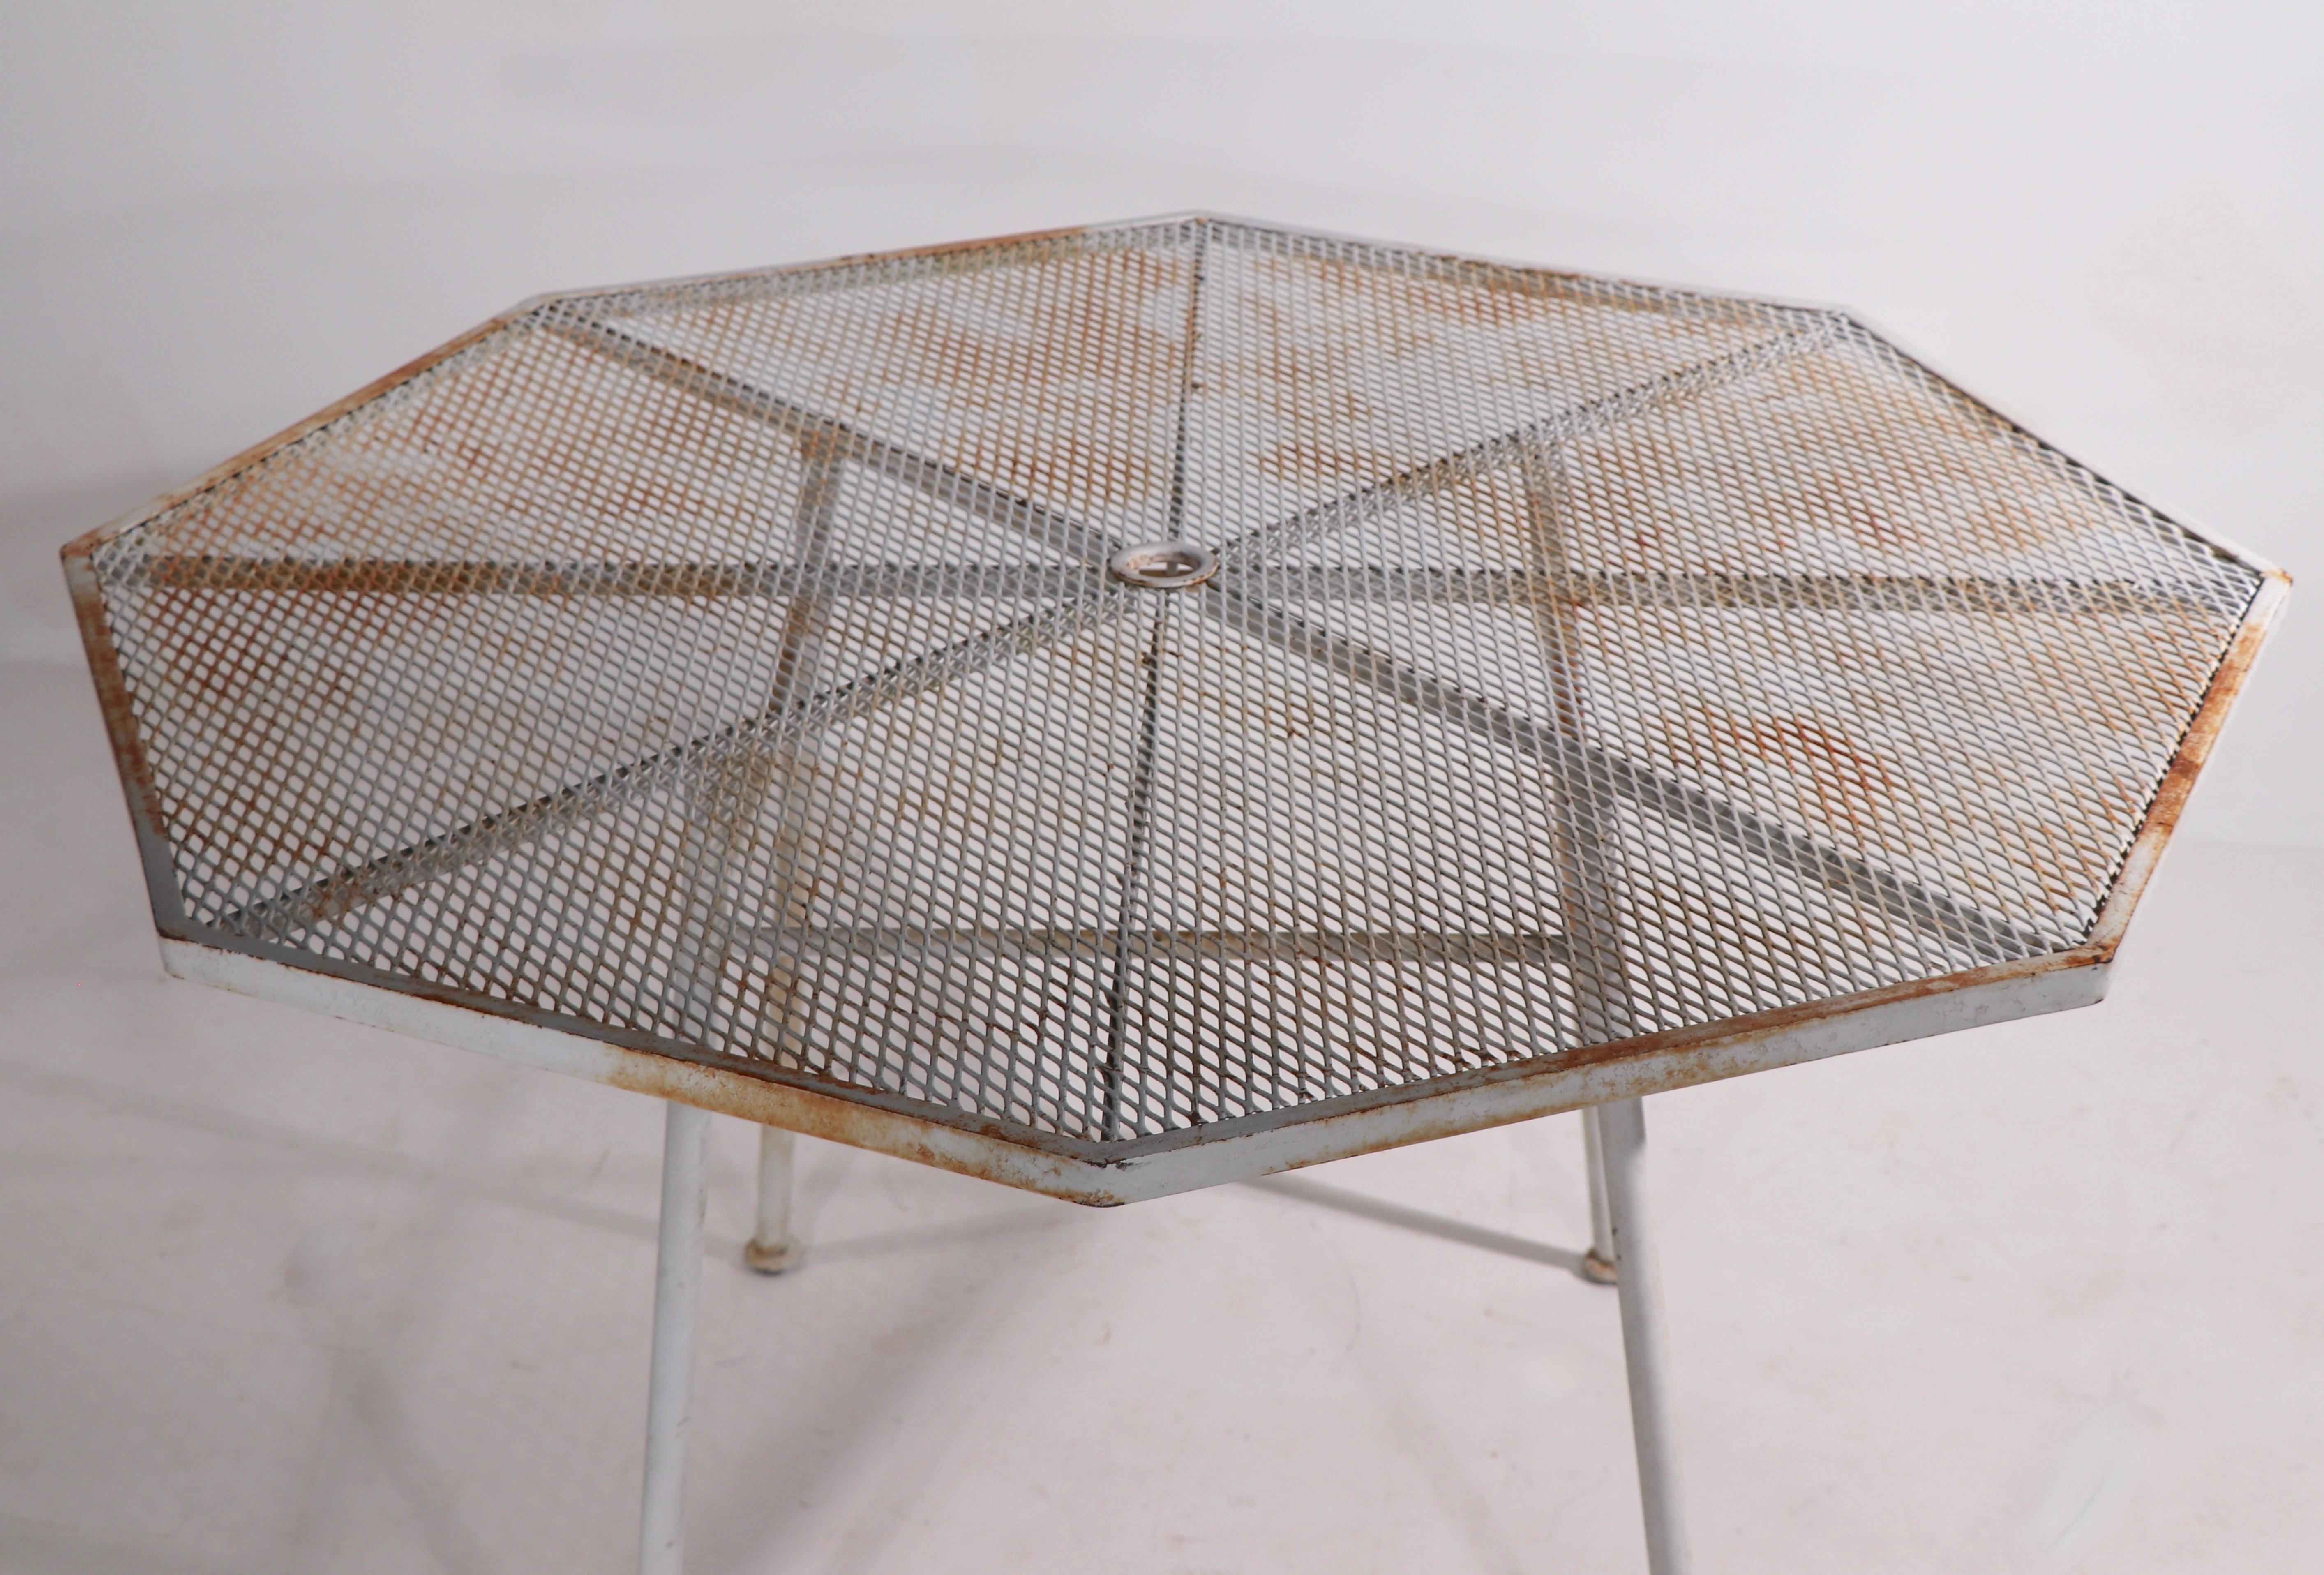 Rare Sculptura garden, patio dining table by Russell Woodard. The table has an octagonal metal mesh top, on four tubular iron legs. The table shows cosmetic wear to the paint finish, but is free of structural damage, weld or repairs. Usable as is or